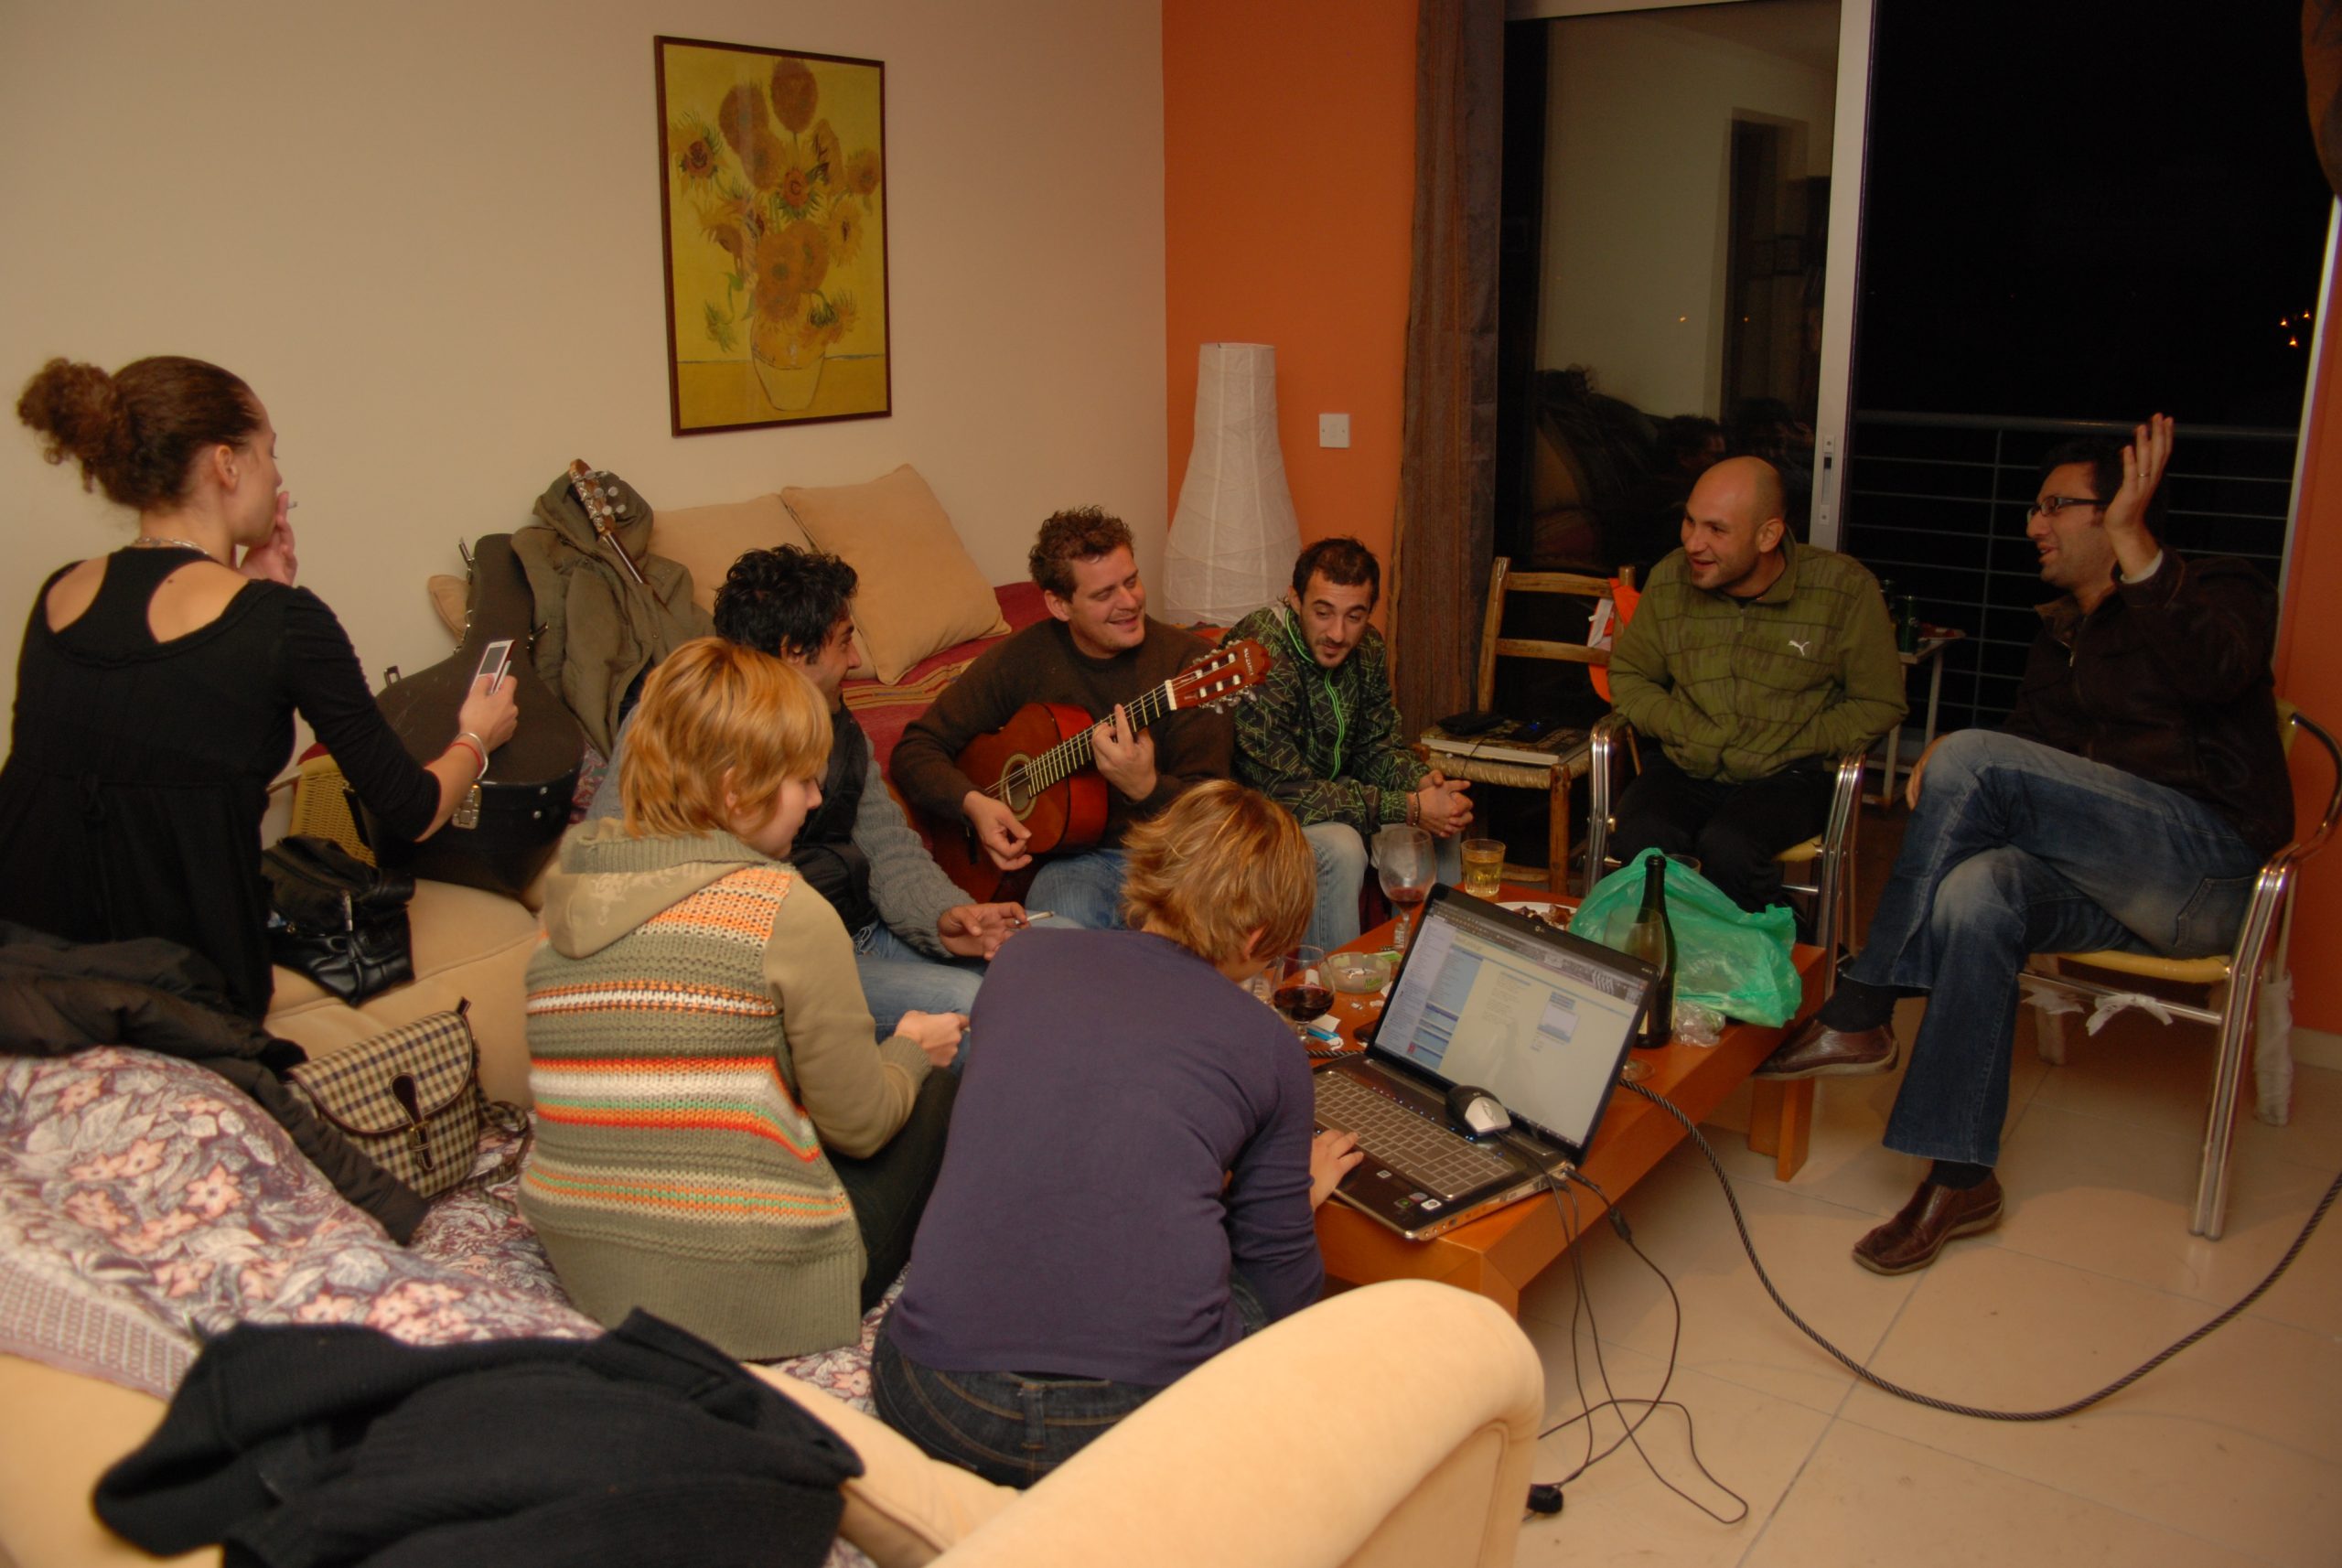 Friends seated in a living room. Someone is playing the guitar.